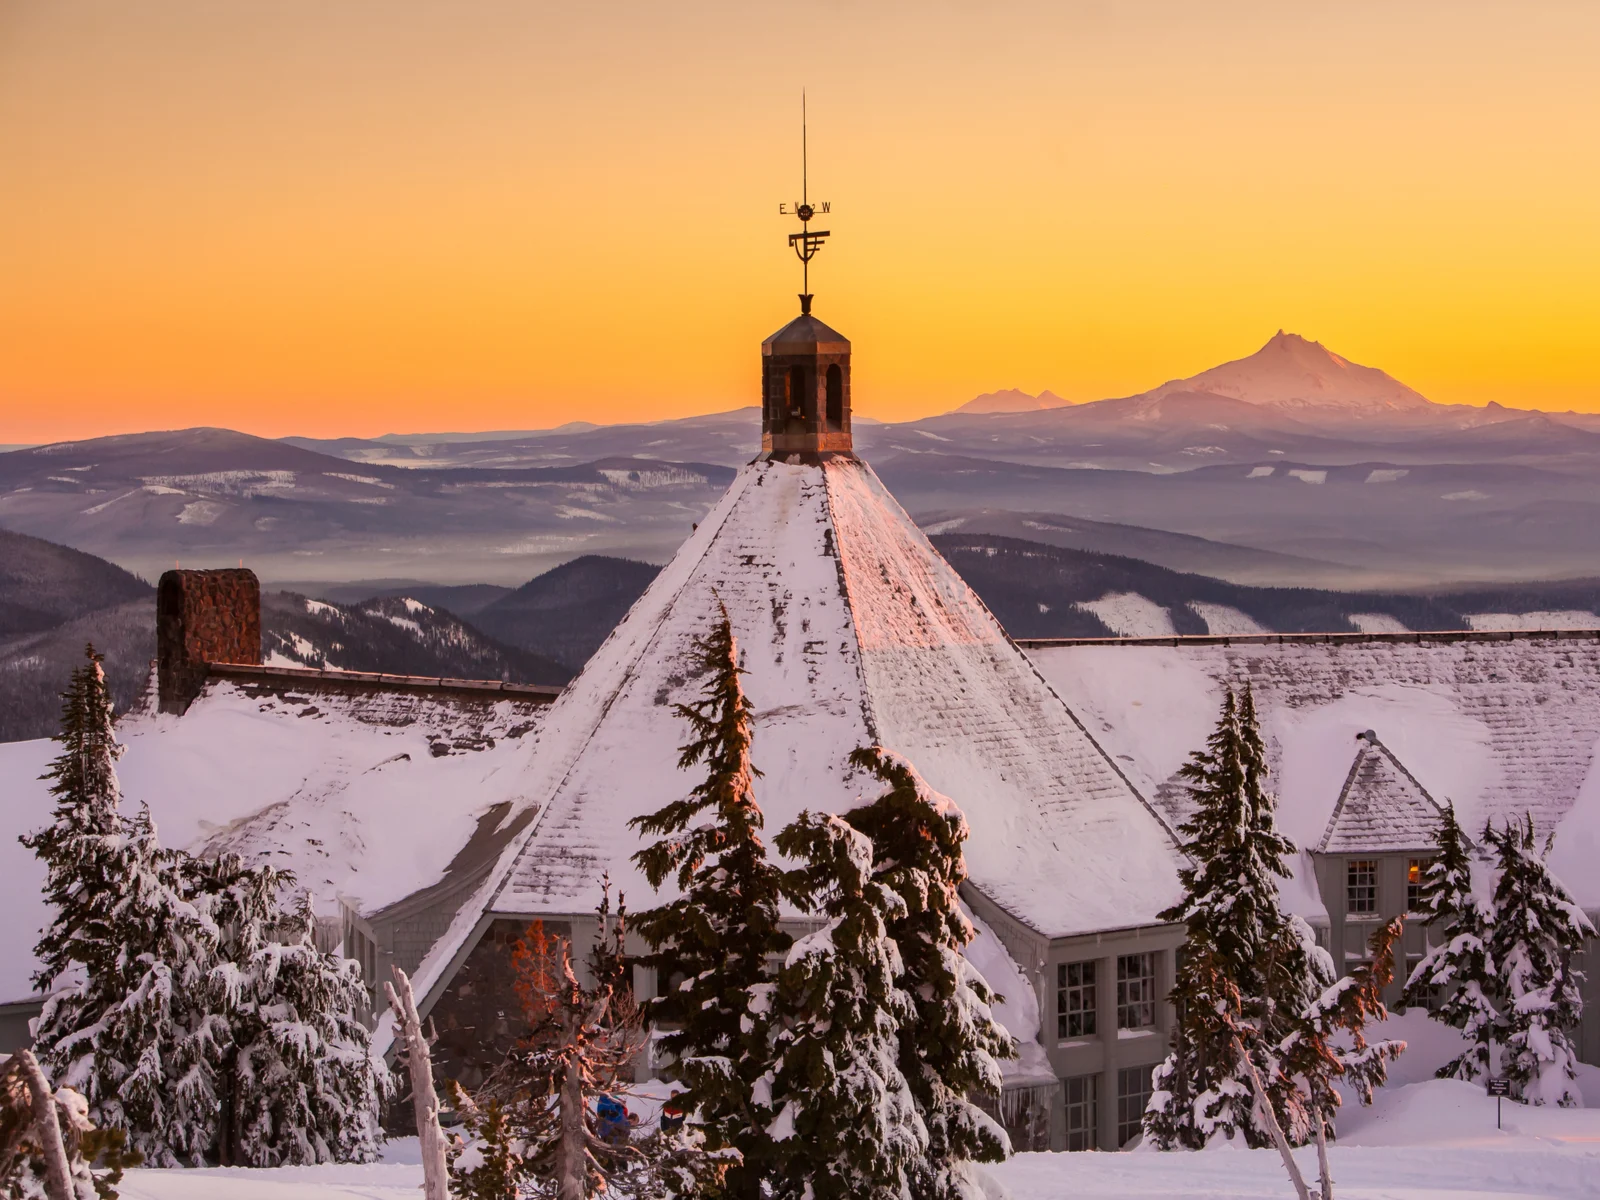 Dusk view of Timberline Lodge on Mount Hood, one of our favorite places to visit in Oregon